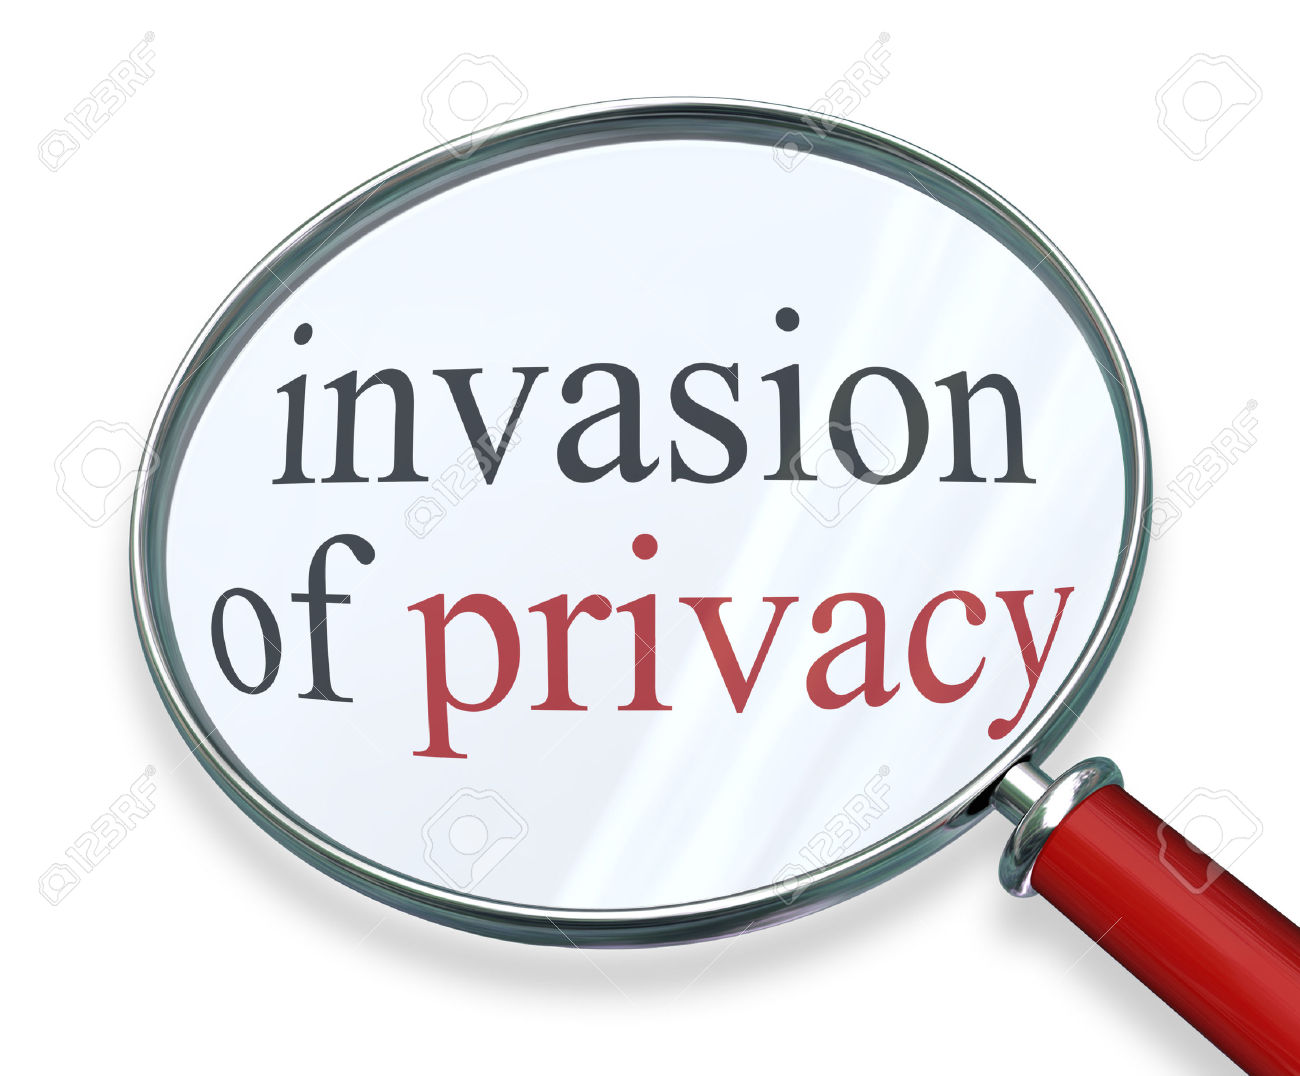 An Invasion Of Privacy #6